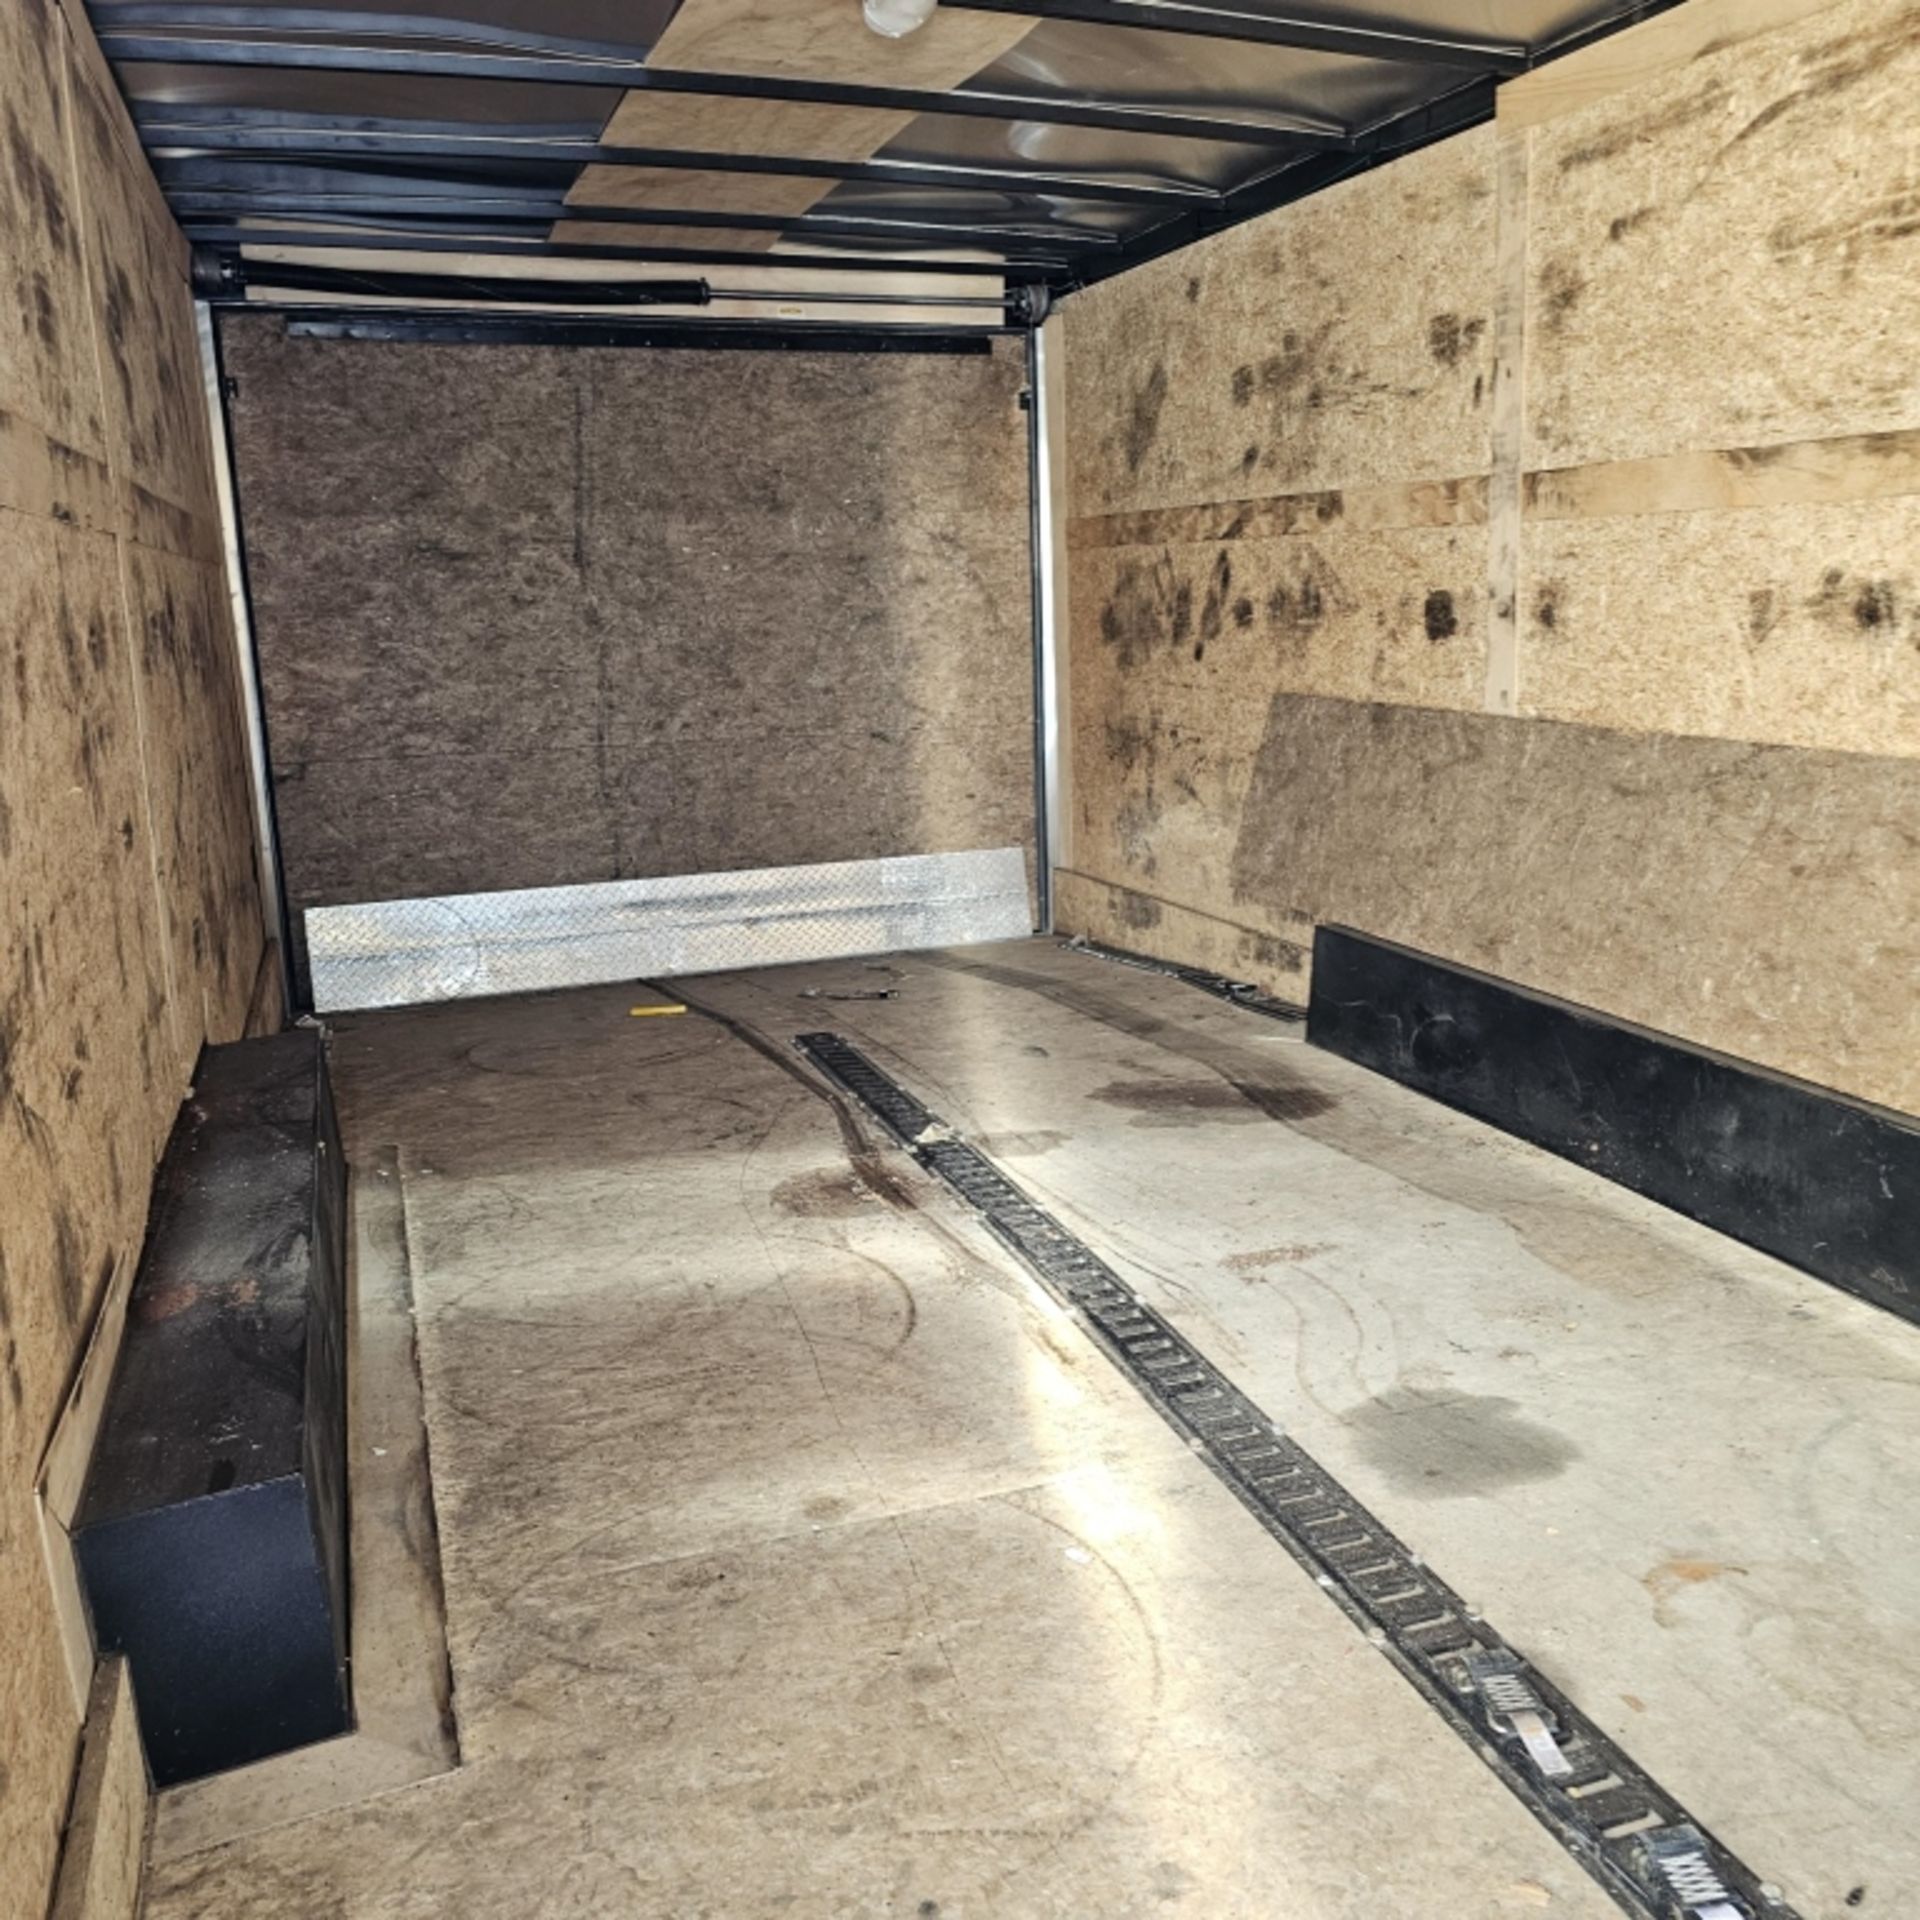 2019 Stealth Cargo Trailer - Image 6 of 7